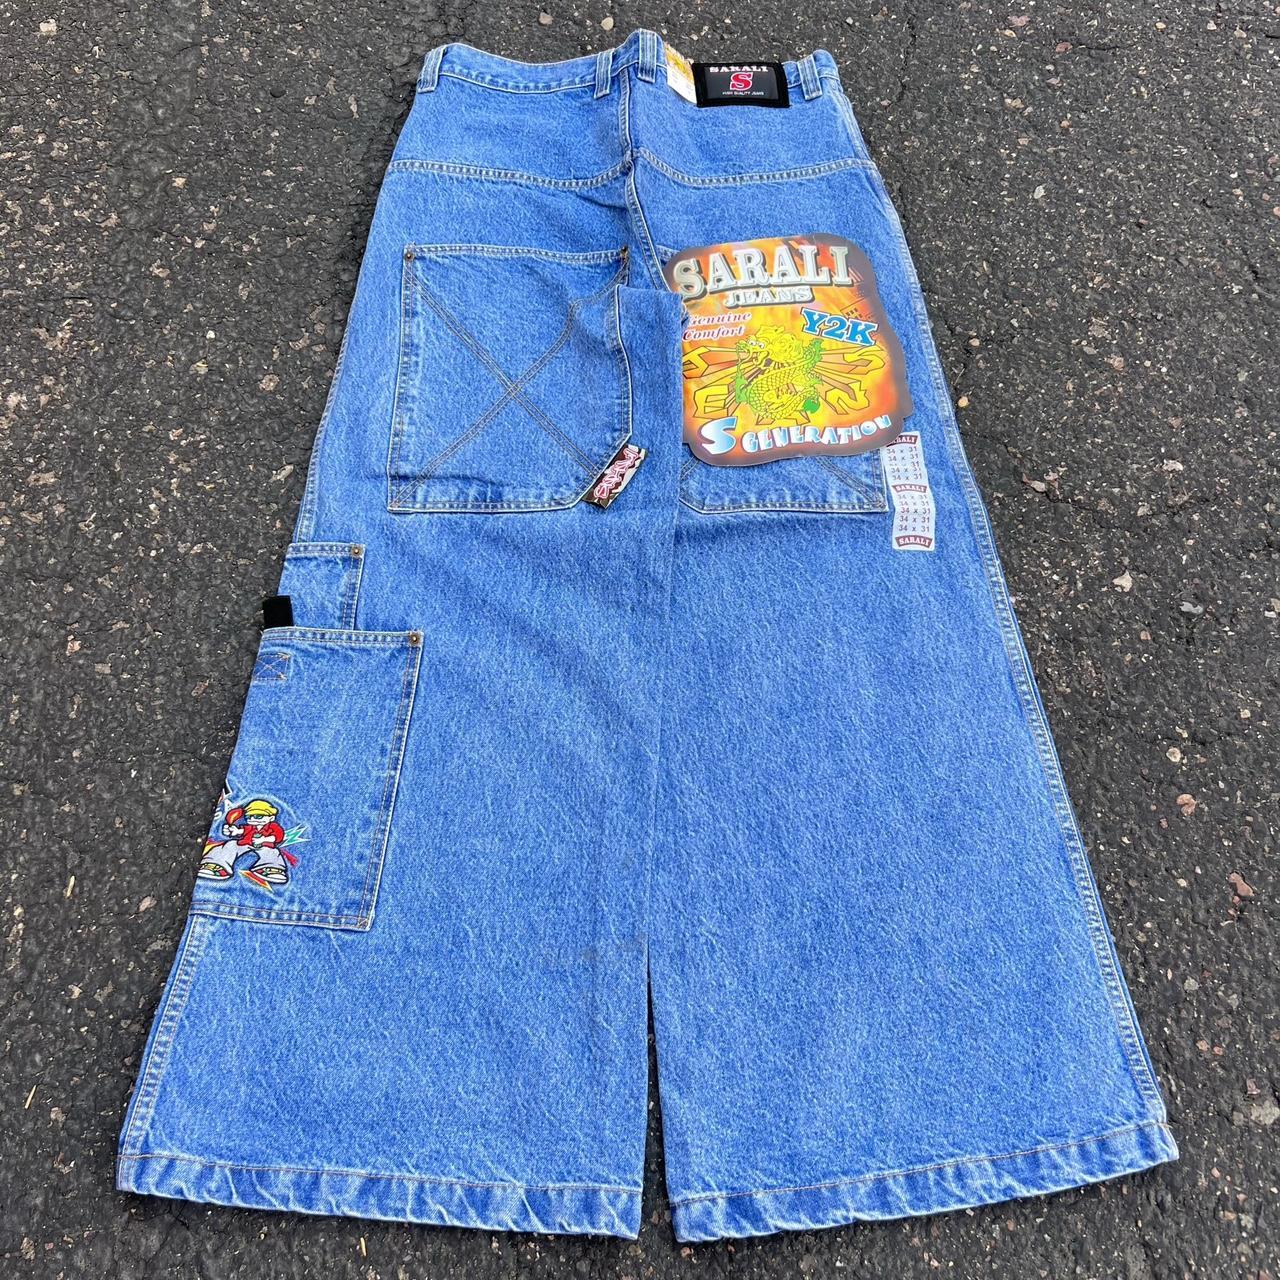 Fire jnco style jeans. These vintage late 90s y2k... - Depop